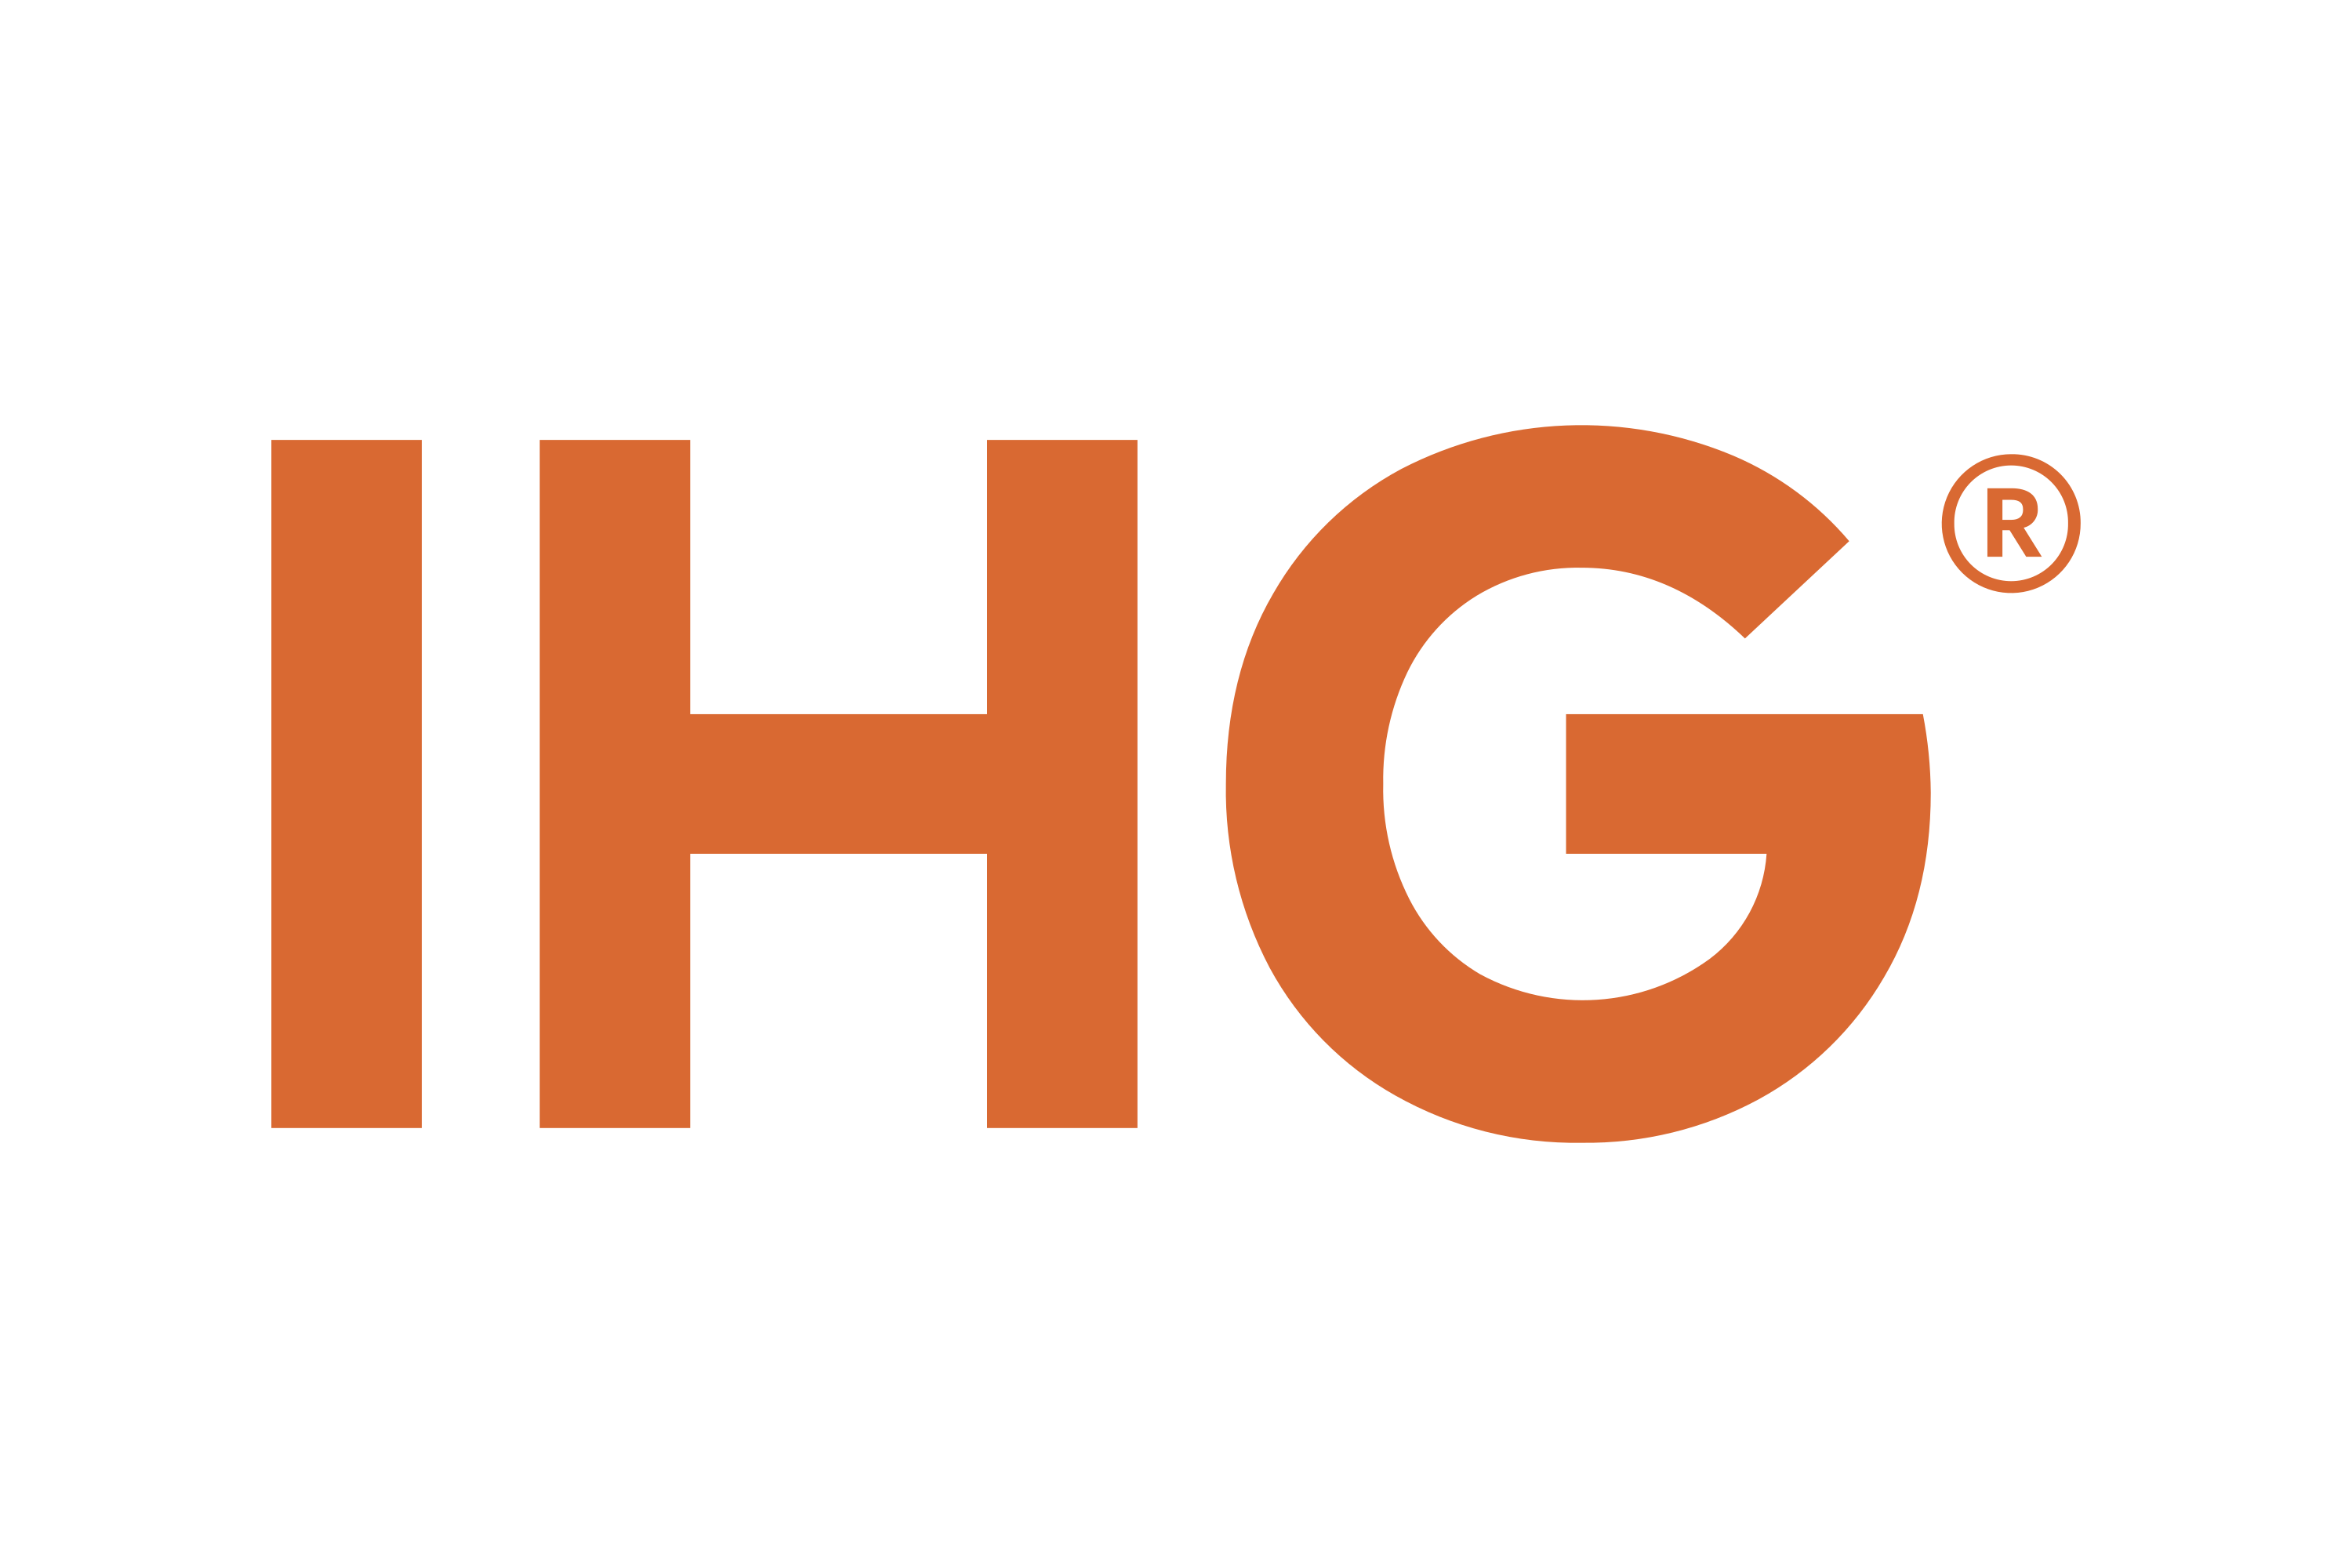 Download InterContinental Hotels Group (IHG) Logo in SVG Vector or PNG